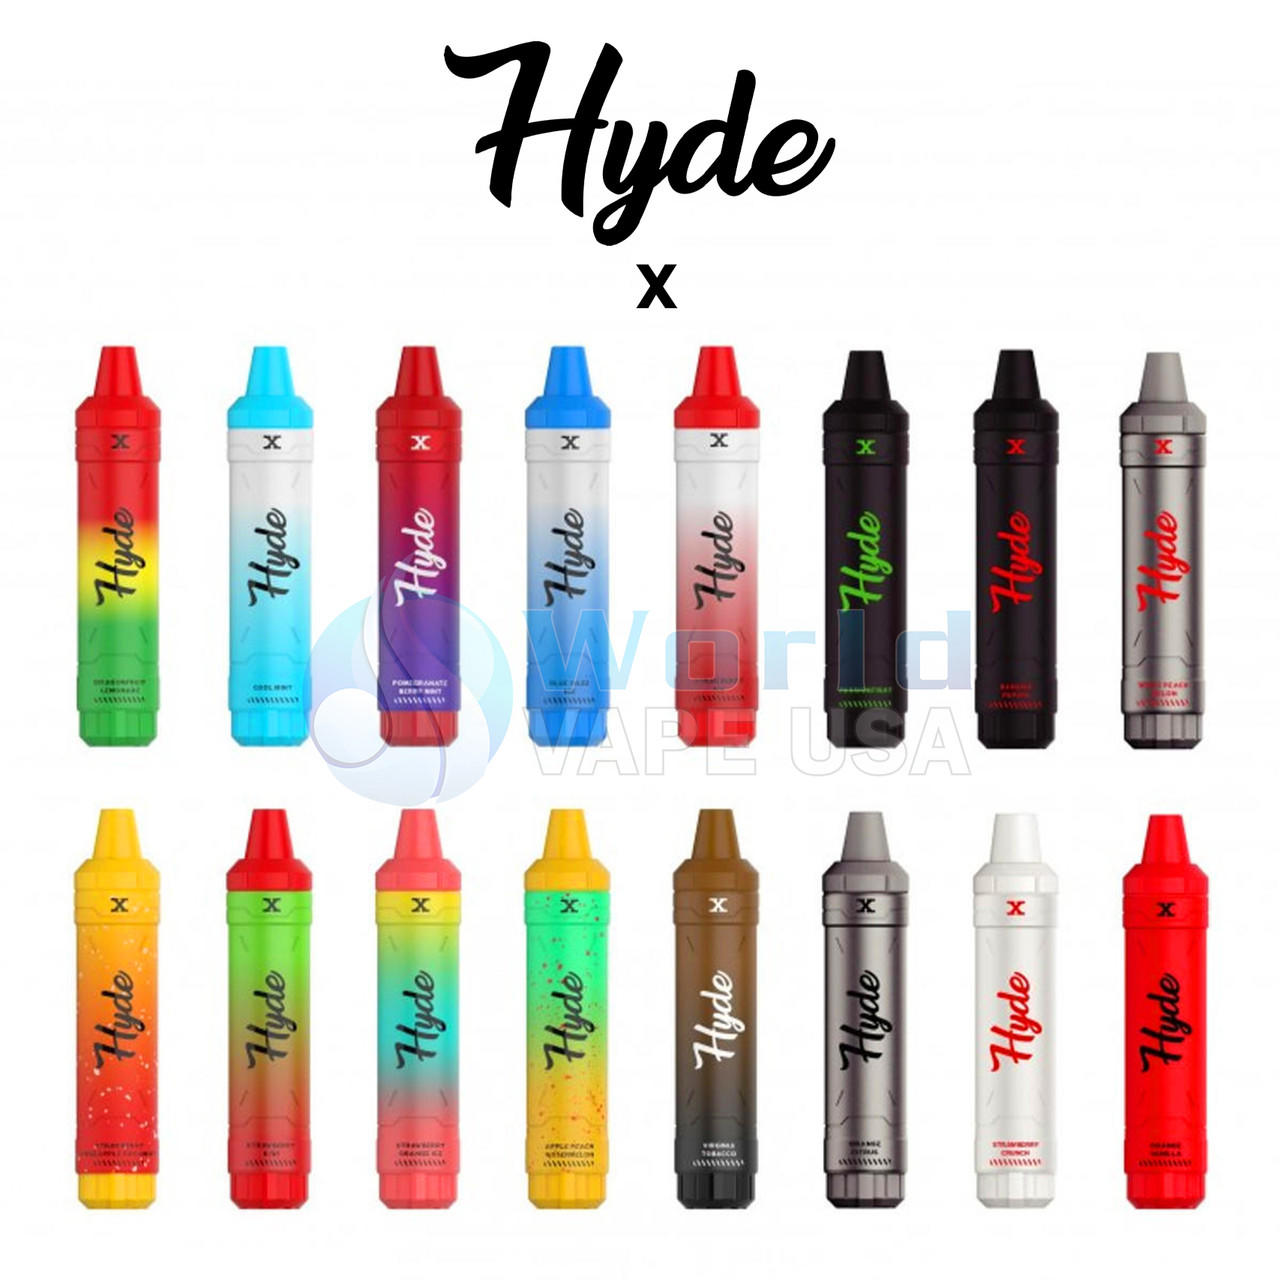  HYDE X 5% DISPOSABLE DEVICE 7ML (3000 PUFFS) - DISPLAY OF 10CT 